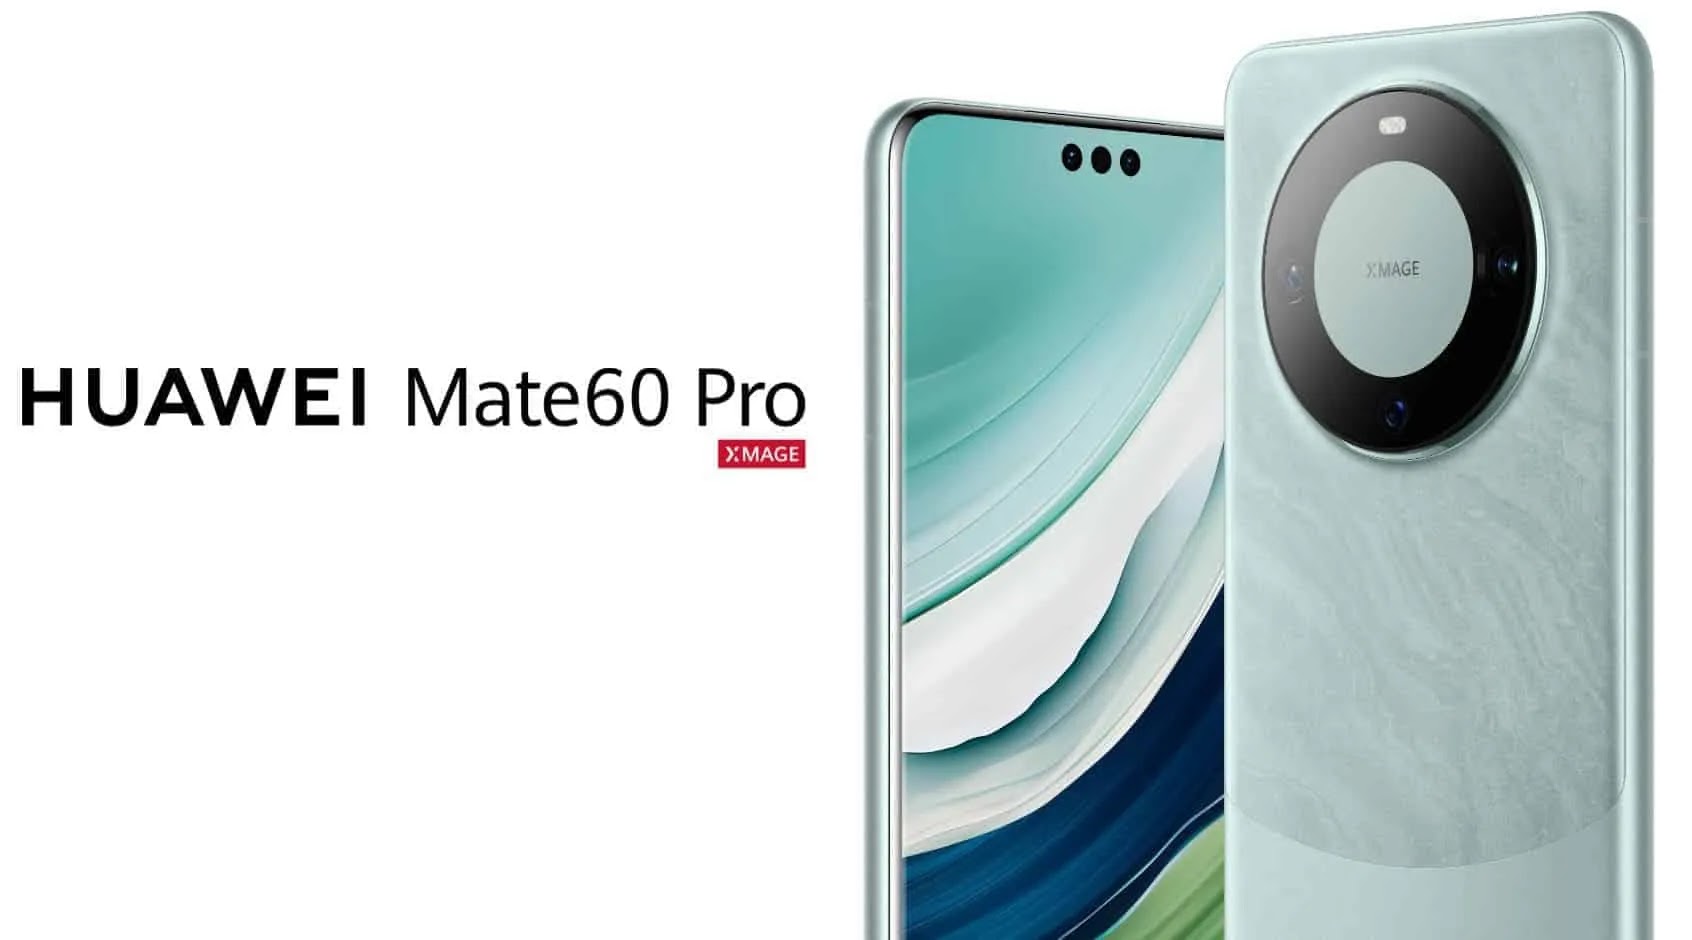 The Huawei MATE 60 PRO: The Only Smartphone Not Monitored by the US! US  Blockade Fails: White House Rolls Out Countermeasures